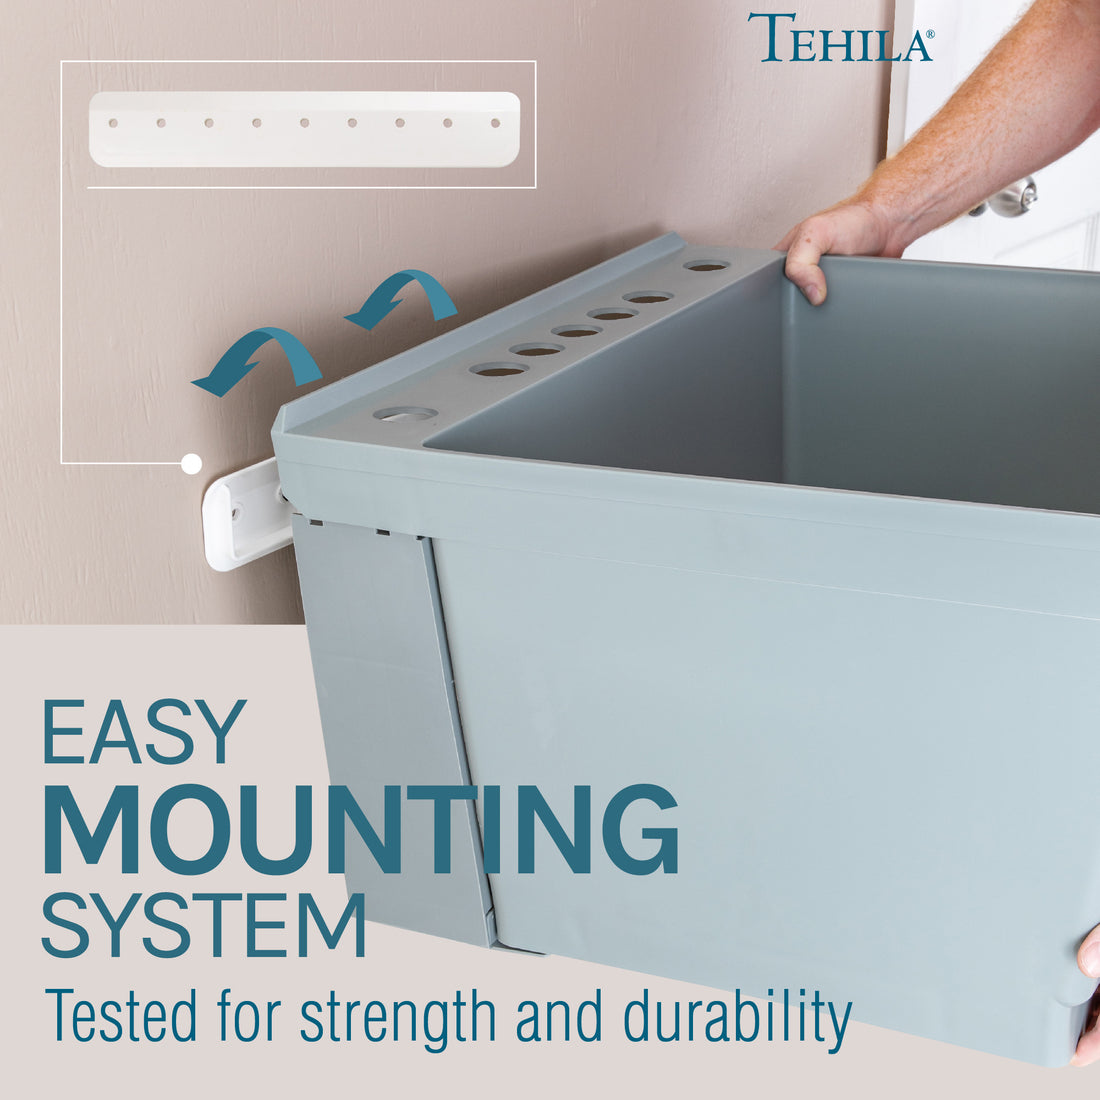 Grey Standard Utility Sink Easy Mounting System Tested for Strength and durability